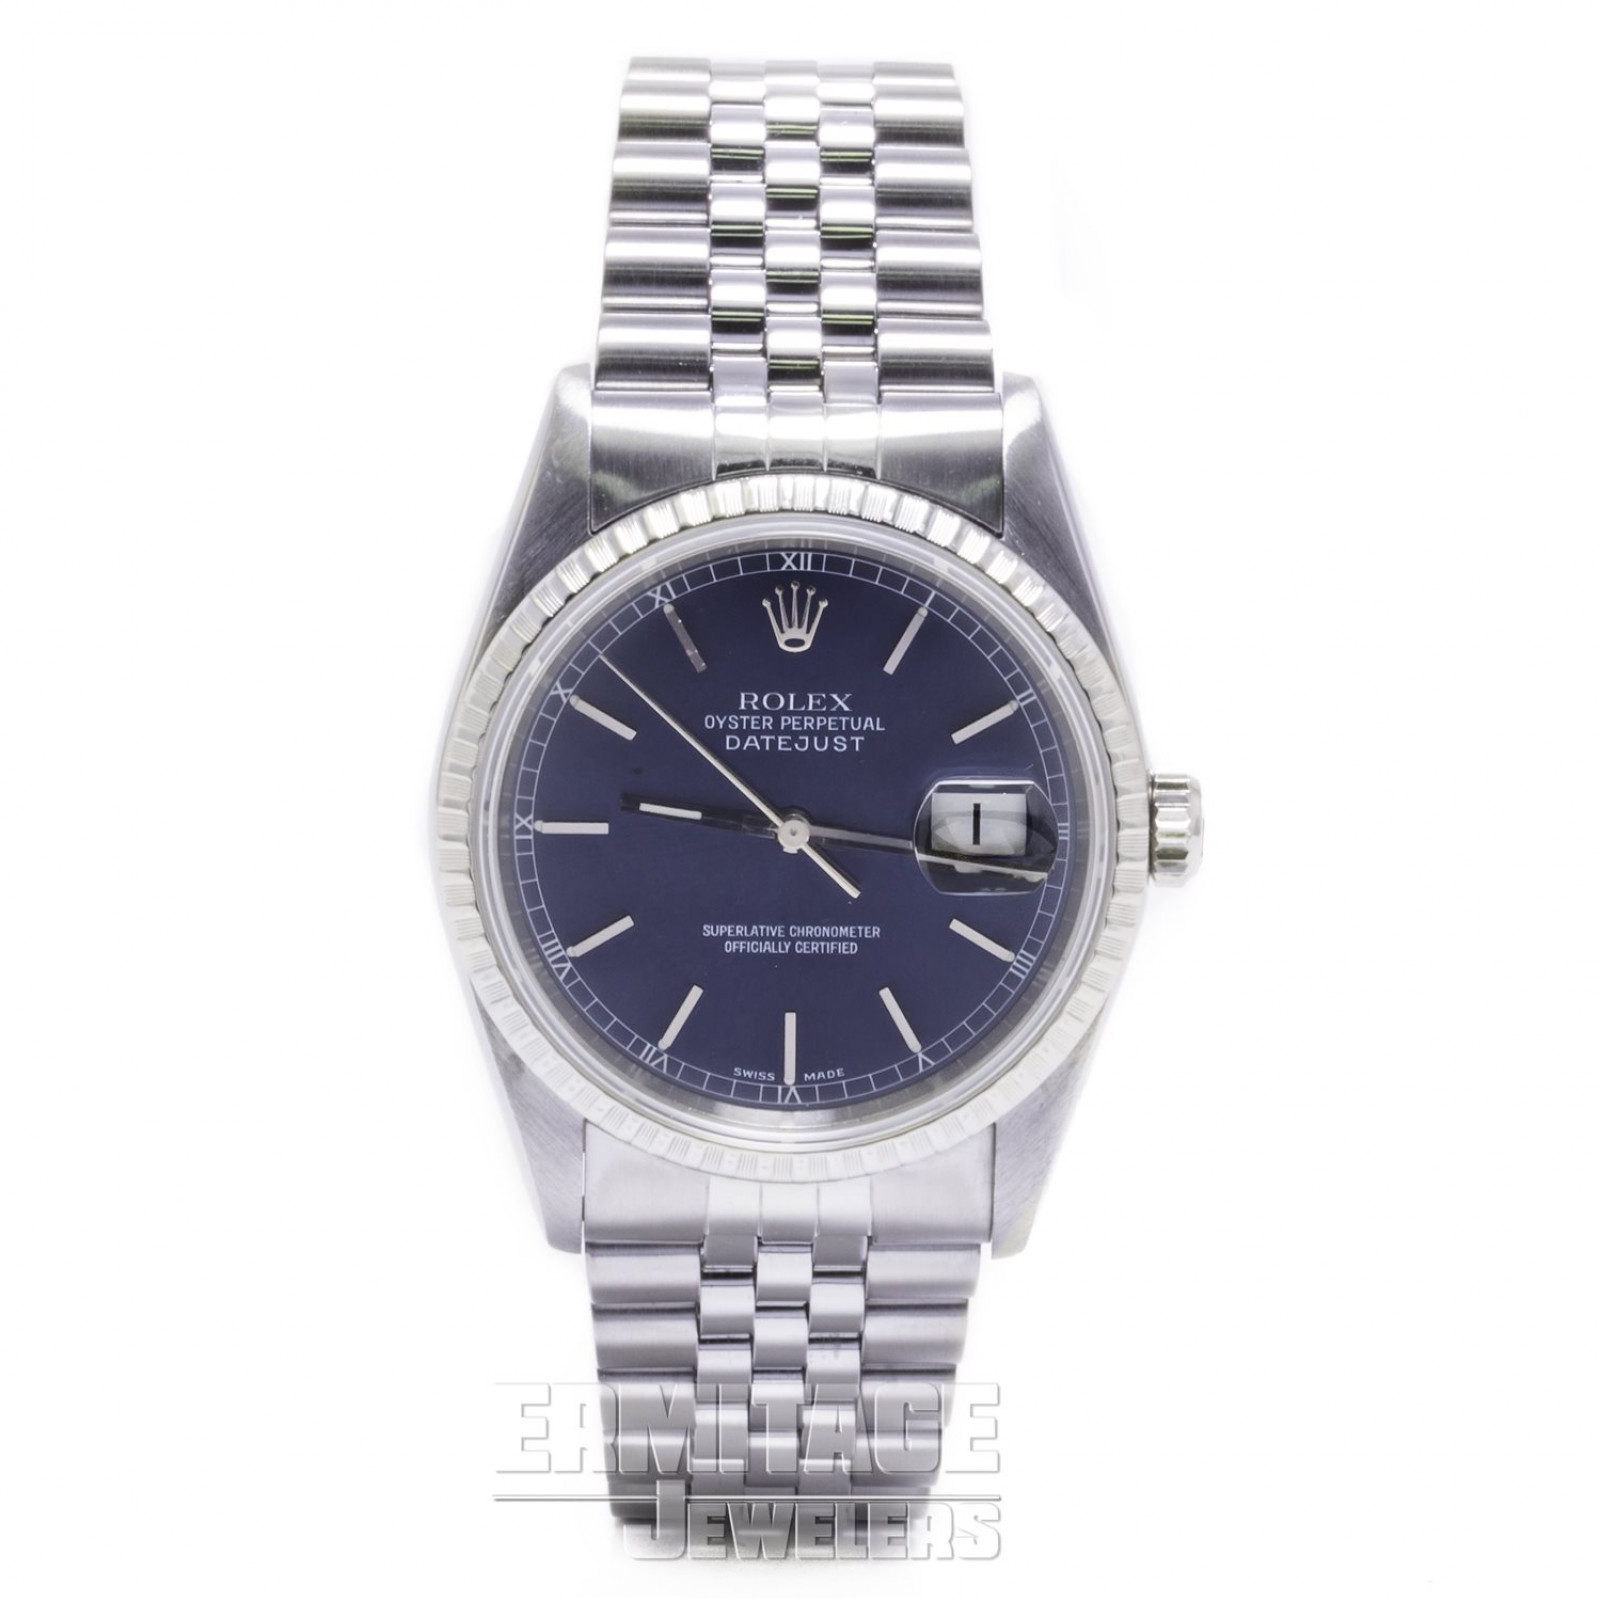 36 mm Rolex Datejust 16220 Steel on Jubilee with Blue Dial